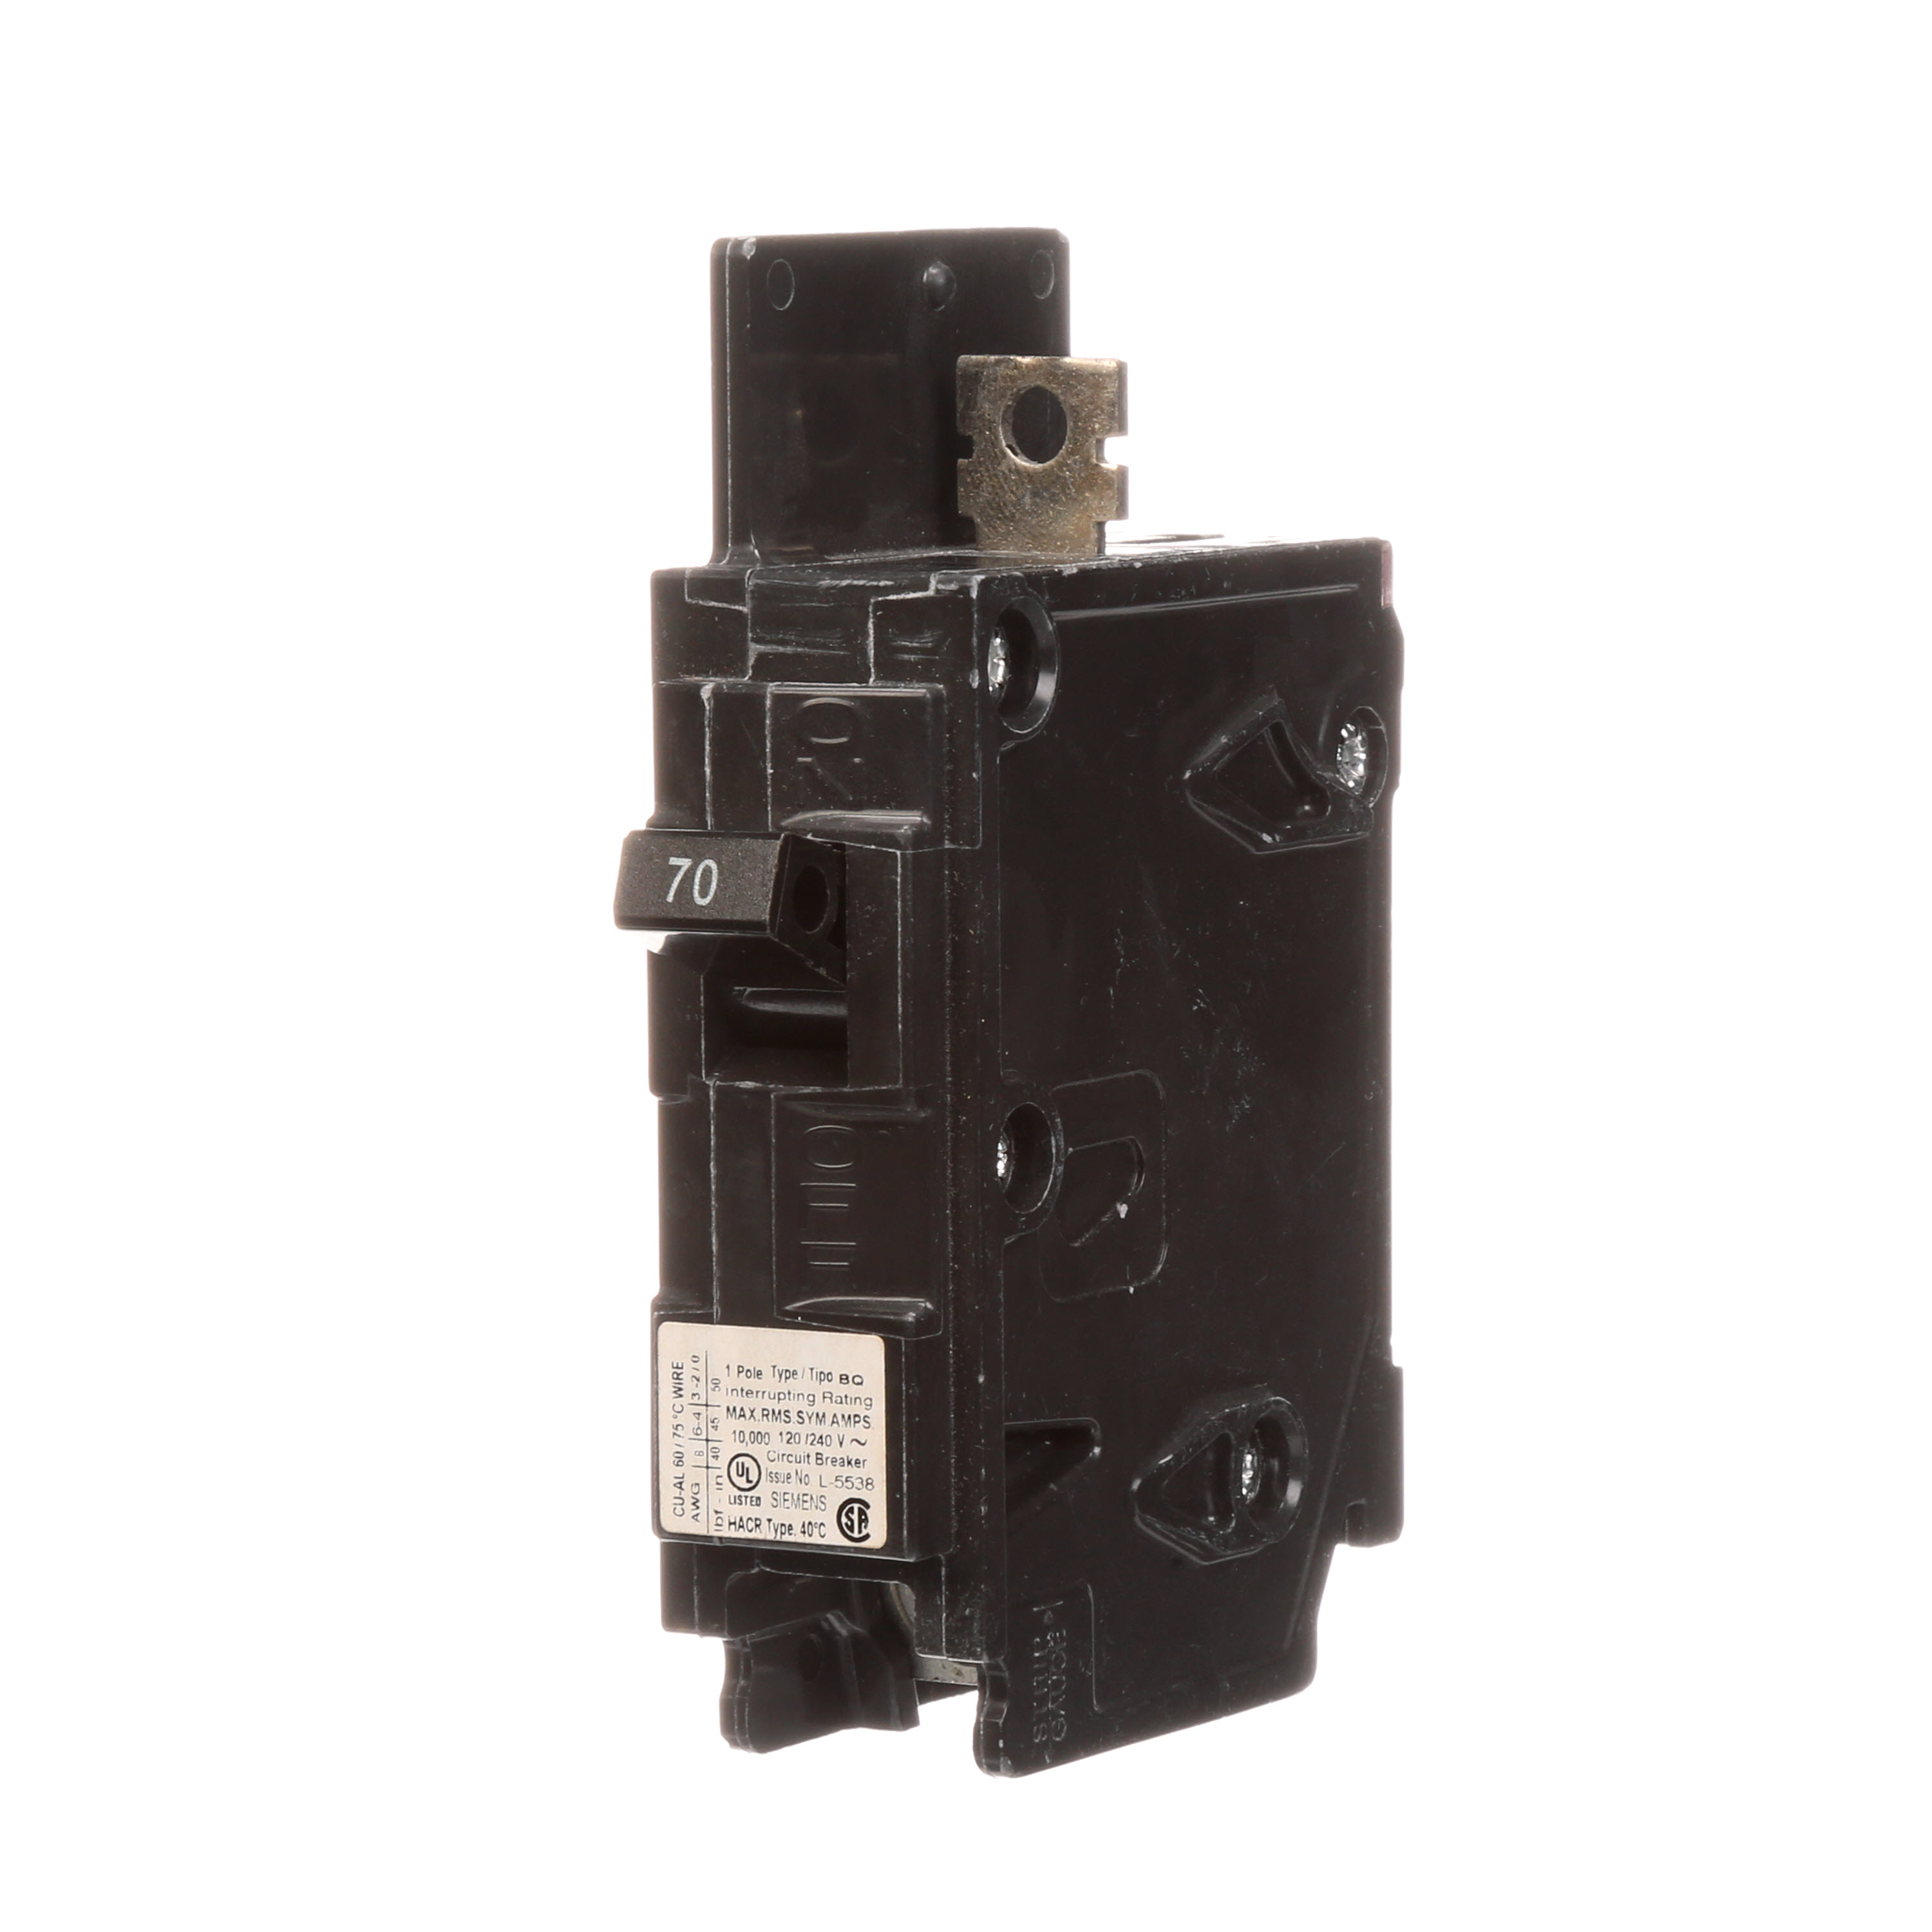 Siemens Low Voltage Molded Case Circuit Breakers General Purpose MCCBs are Circuit Protection Molded Case Circuit Breakers. 1-Pole circuit breaker type BQ. Rated 120V (070A) (AIR 10 kA). Special features Load side lugs are included.